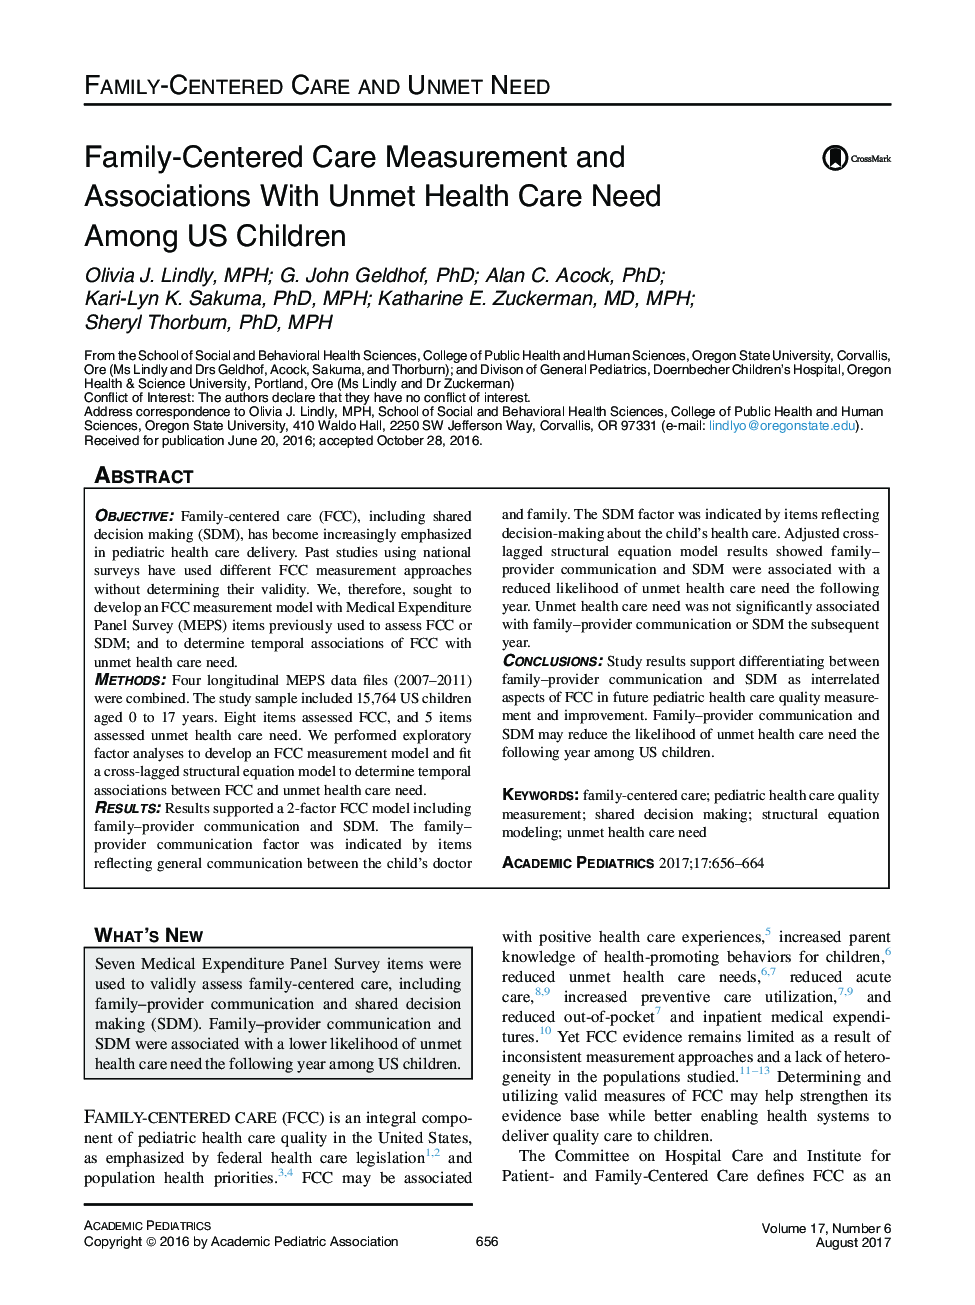 Family-Centered Care and Unmet NeedFamily-Centered Care Measurement and Associations With Unmet Health Care Need Among US Children